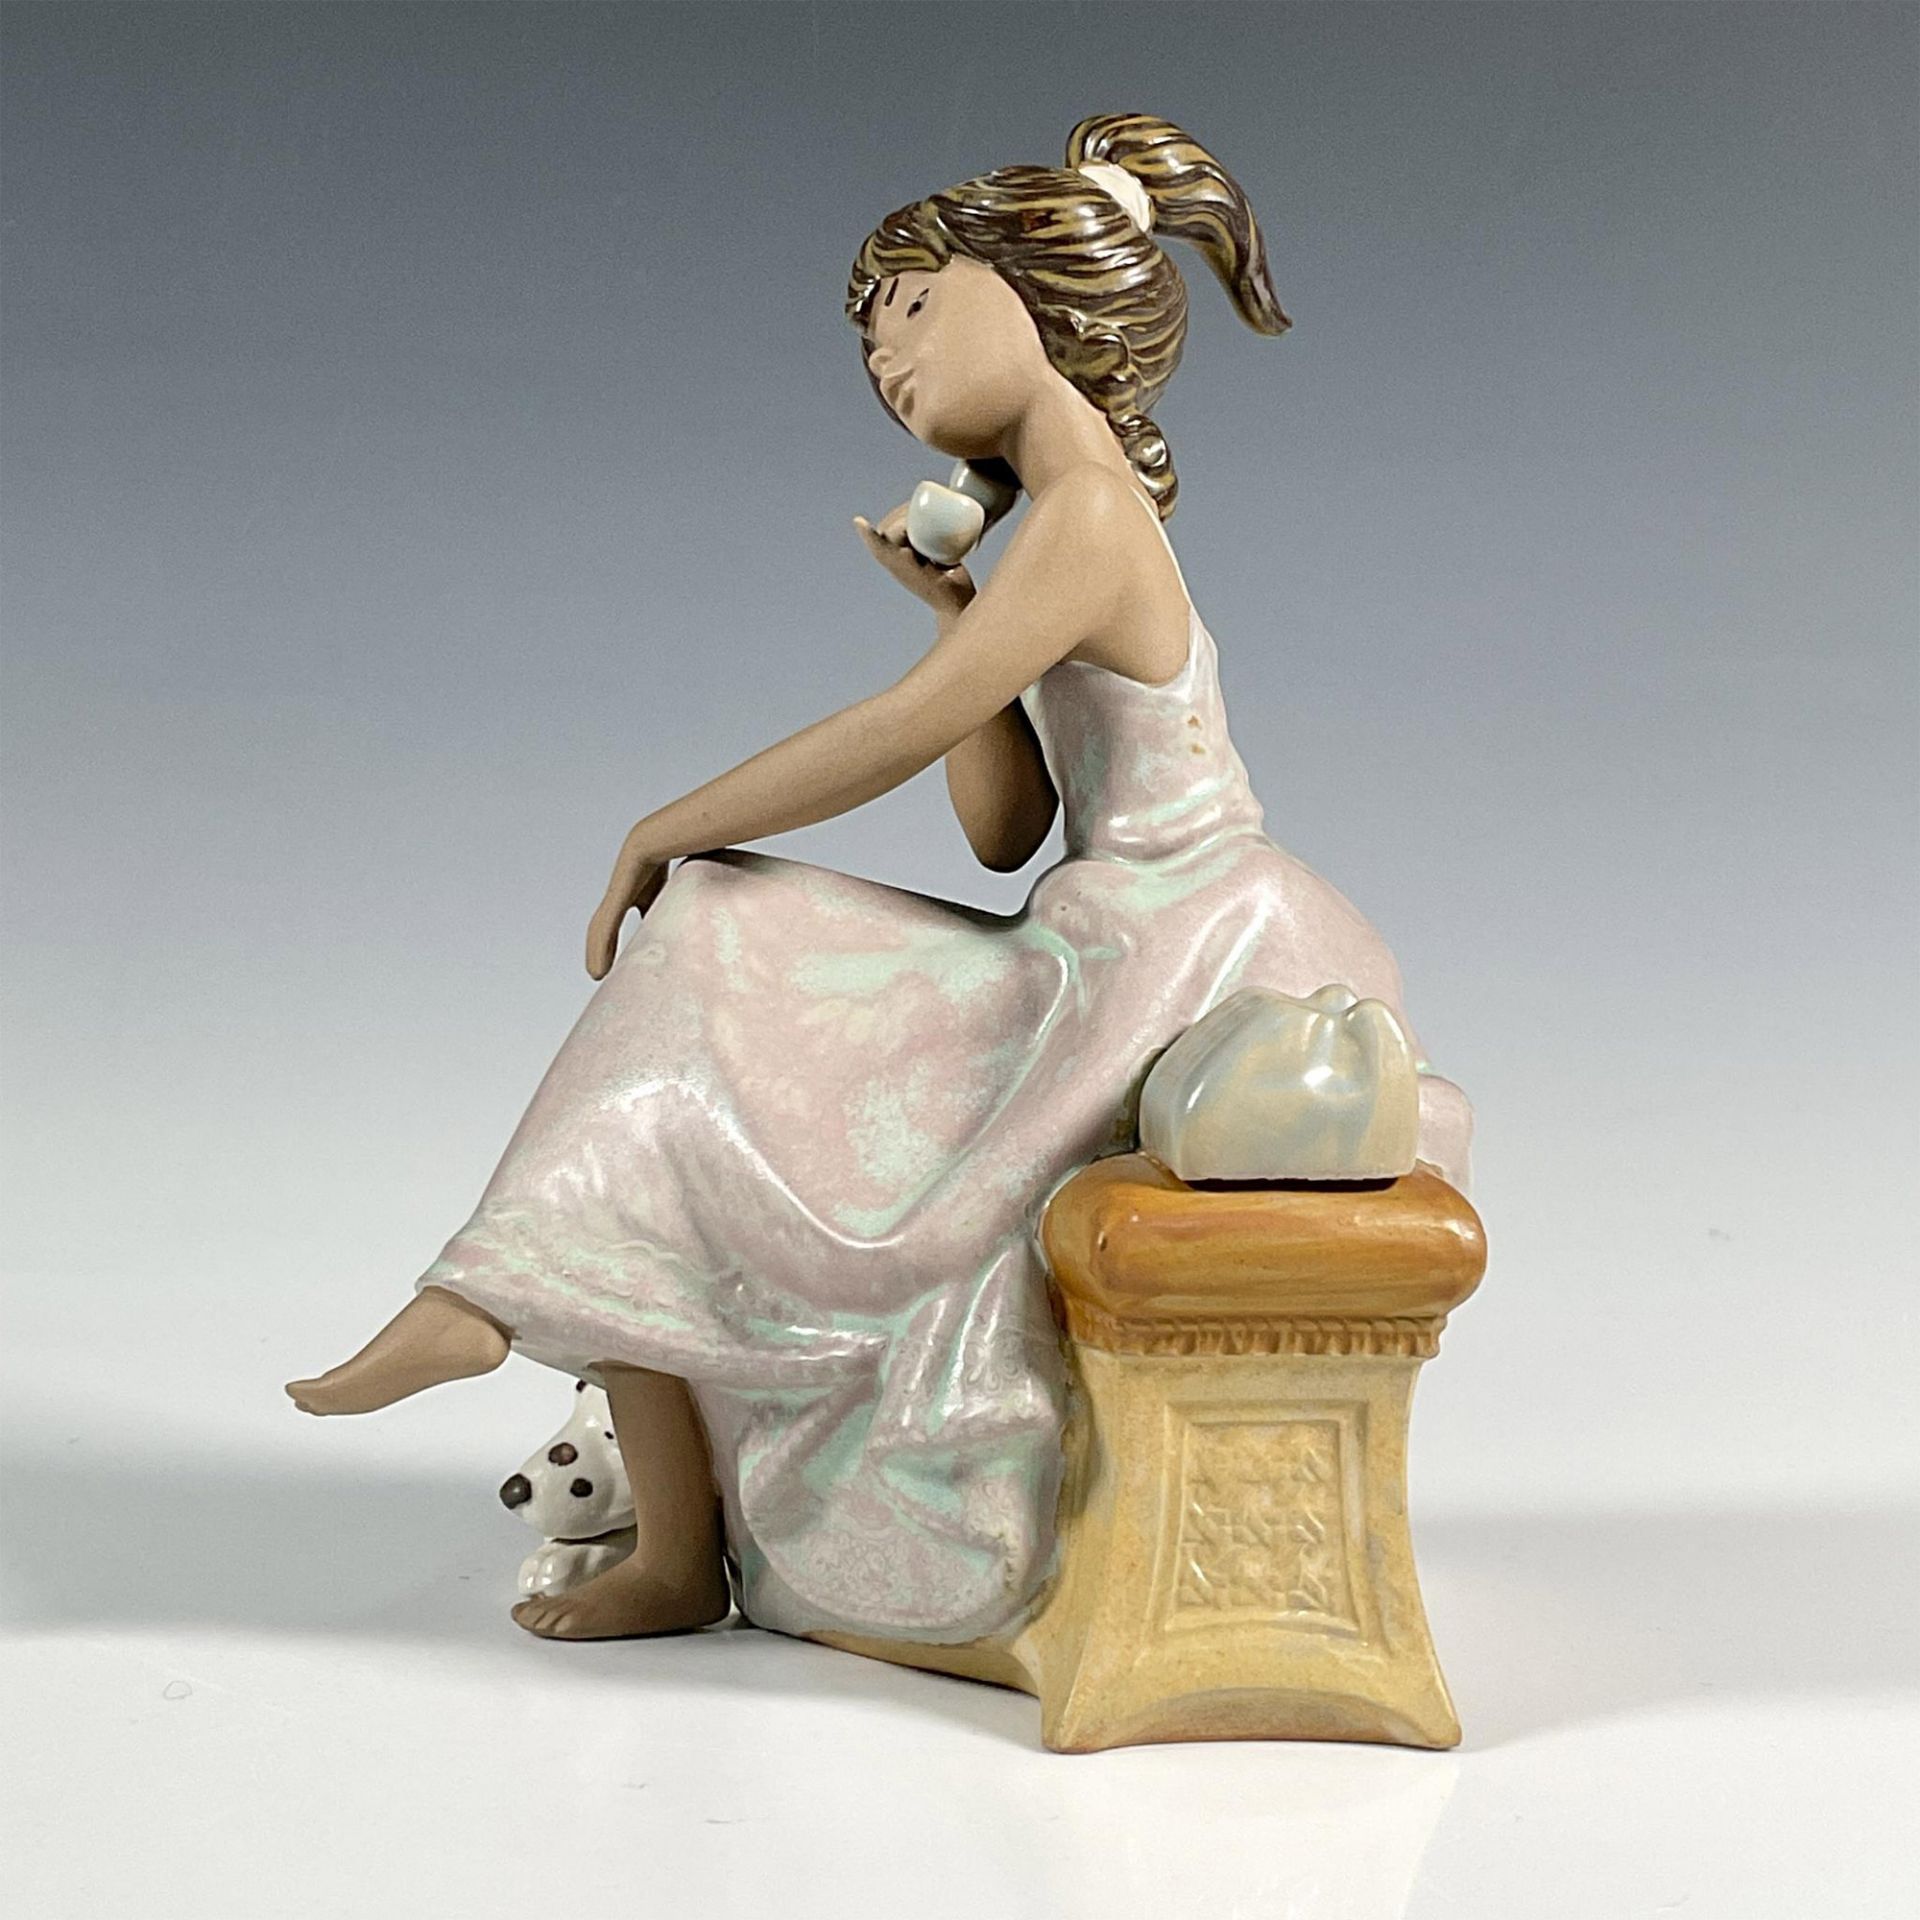 Chit Chat 1015466 - Lladro Porcelain Figurine - Image 3 of 8